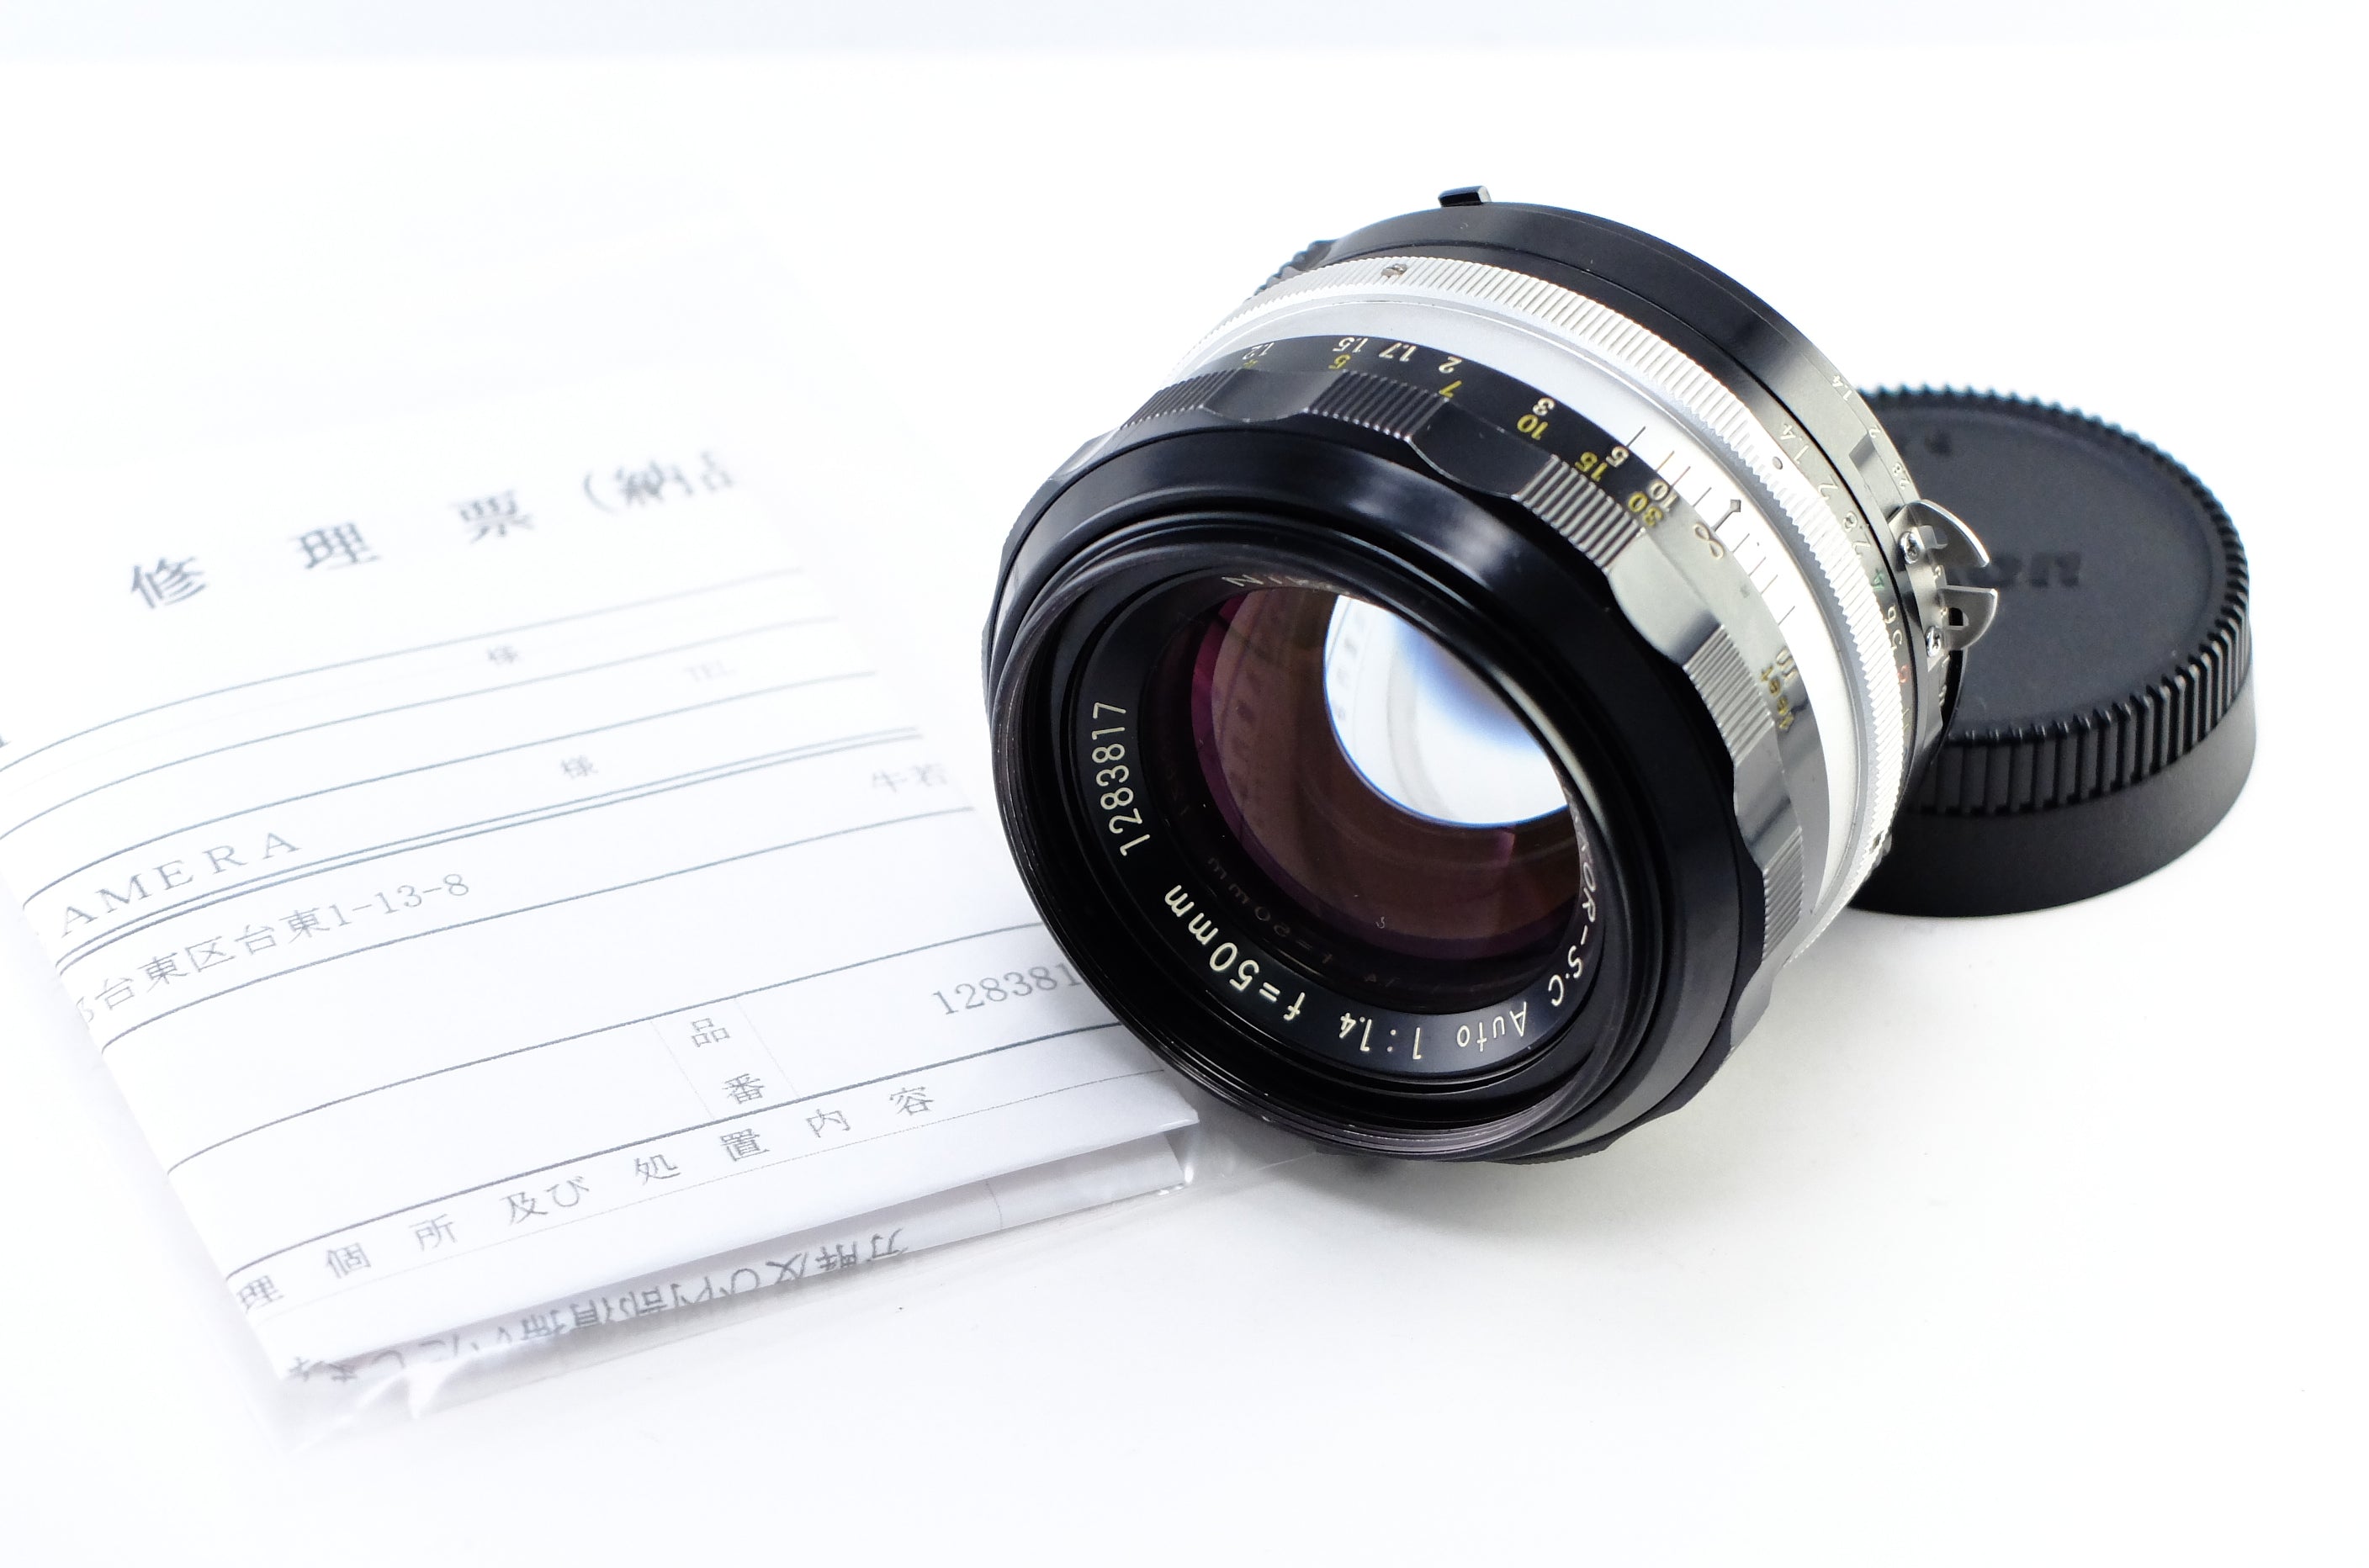 Nikon】NIKKOR-S.C Auto 50mm F1.4 Ai改 OH済み [ニコンFマウント 